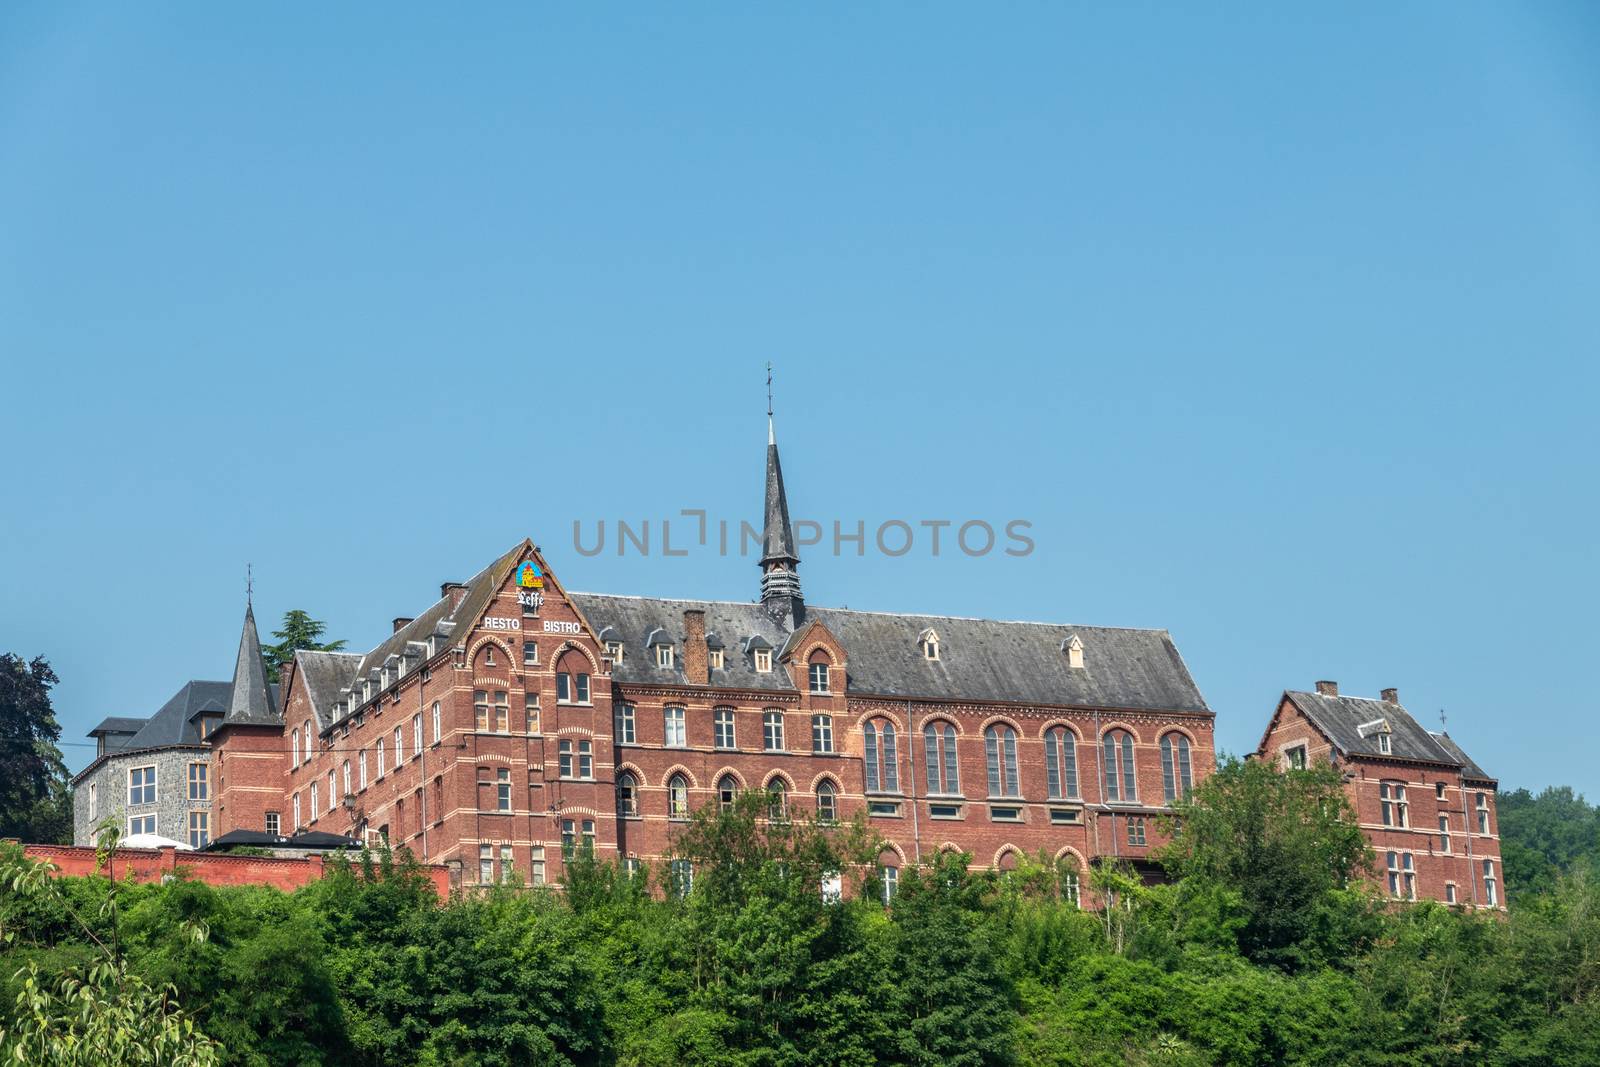 Dinant, Belgium - June 26, 2019: Red stone ancient convent of the Capuchins, now hotel, museum and administratif building under blue sky and green foliage in front.